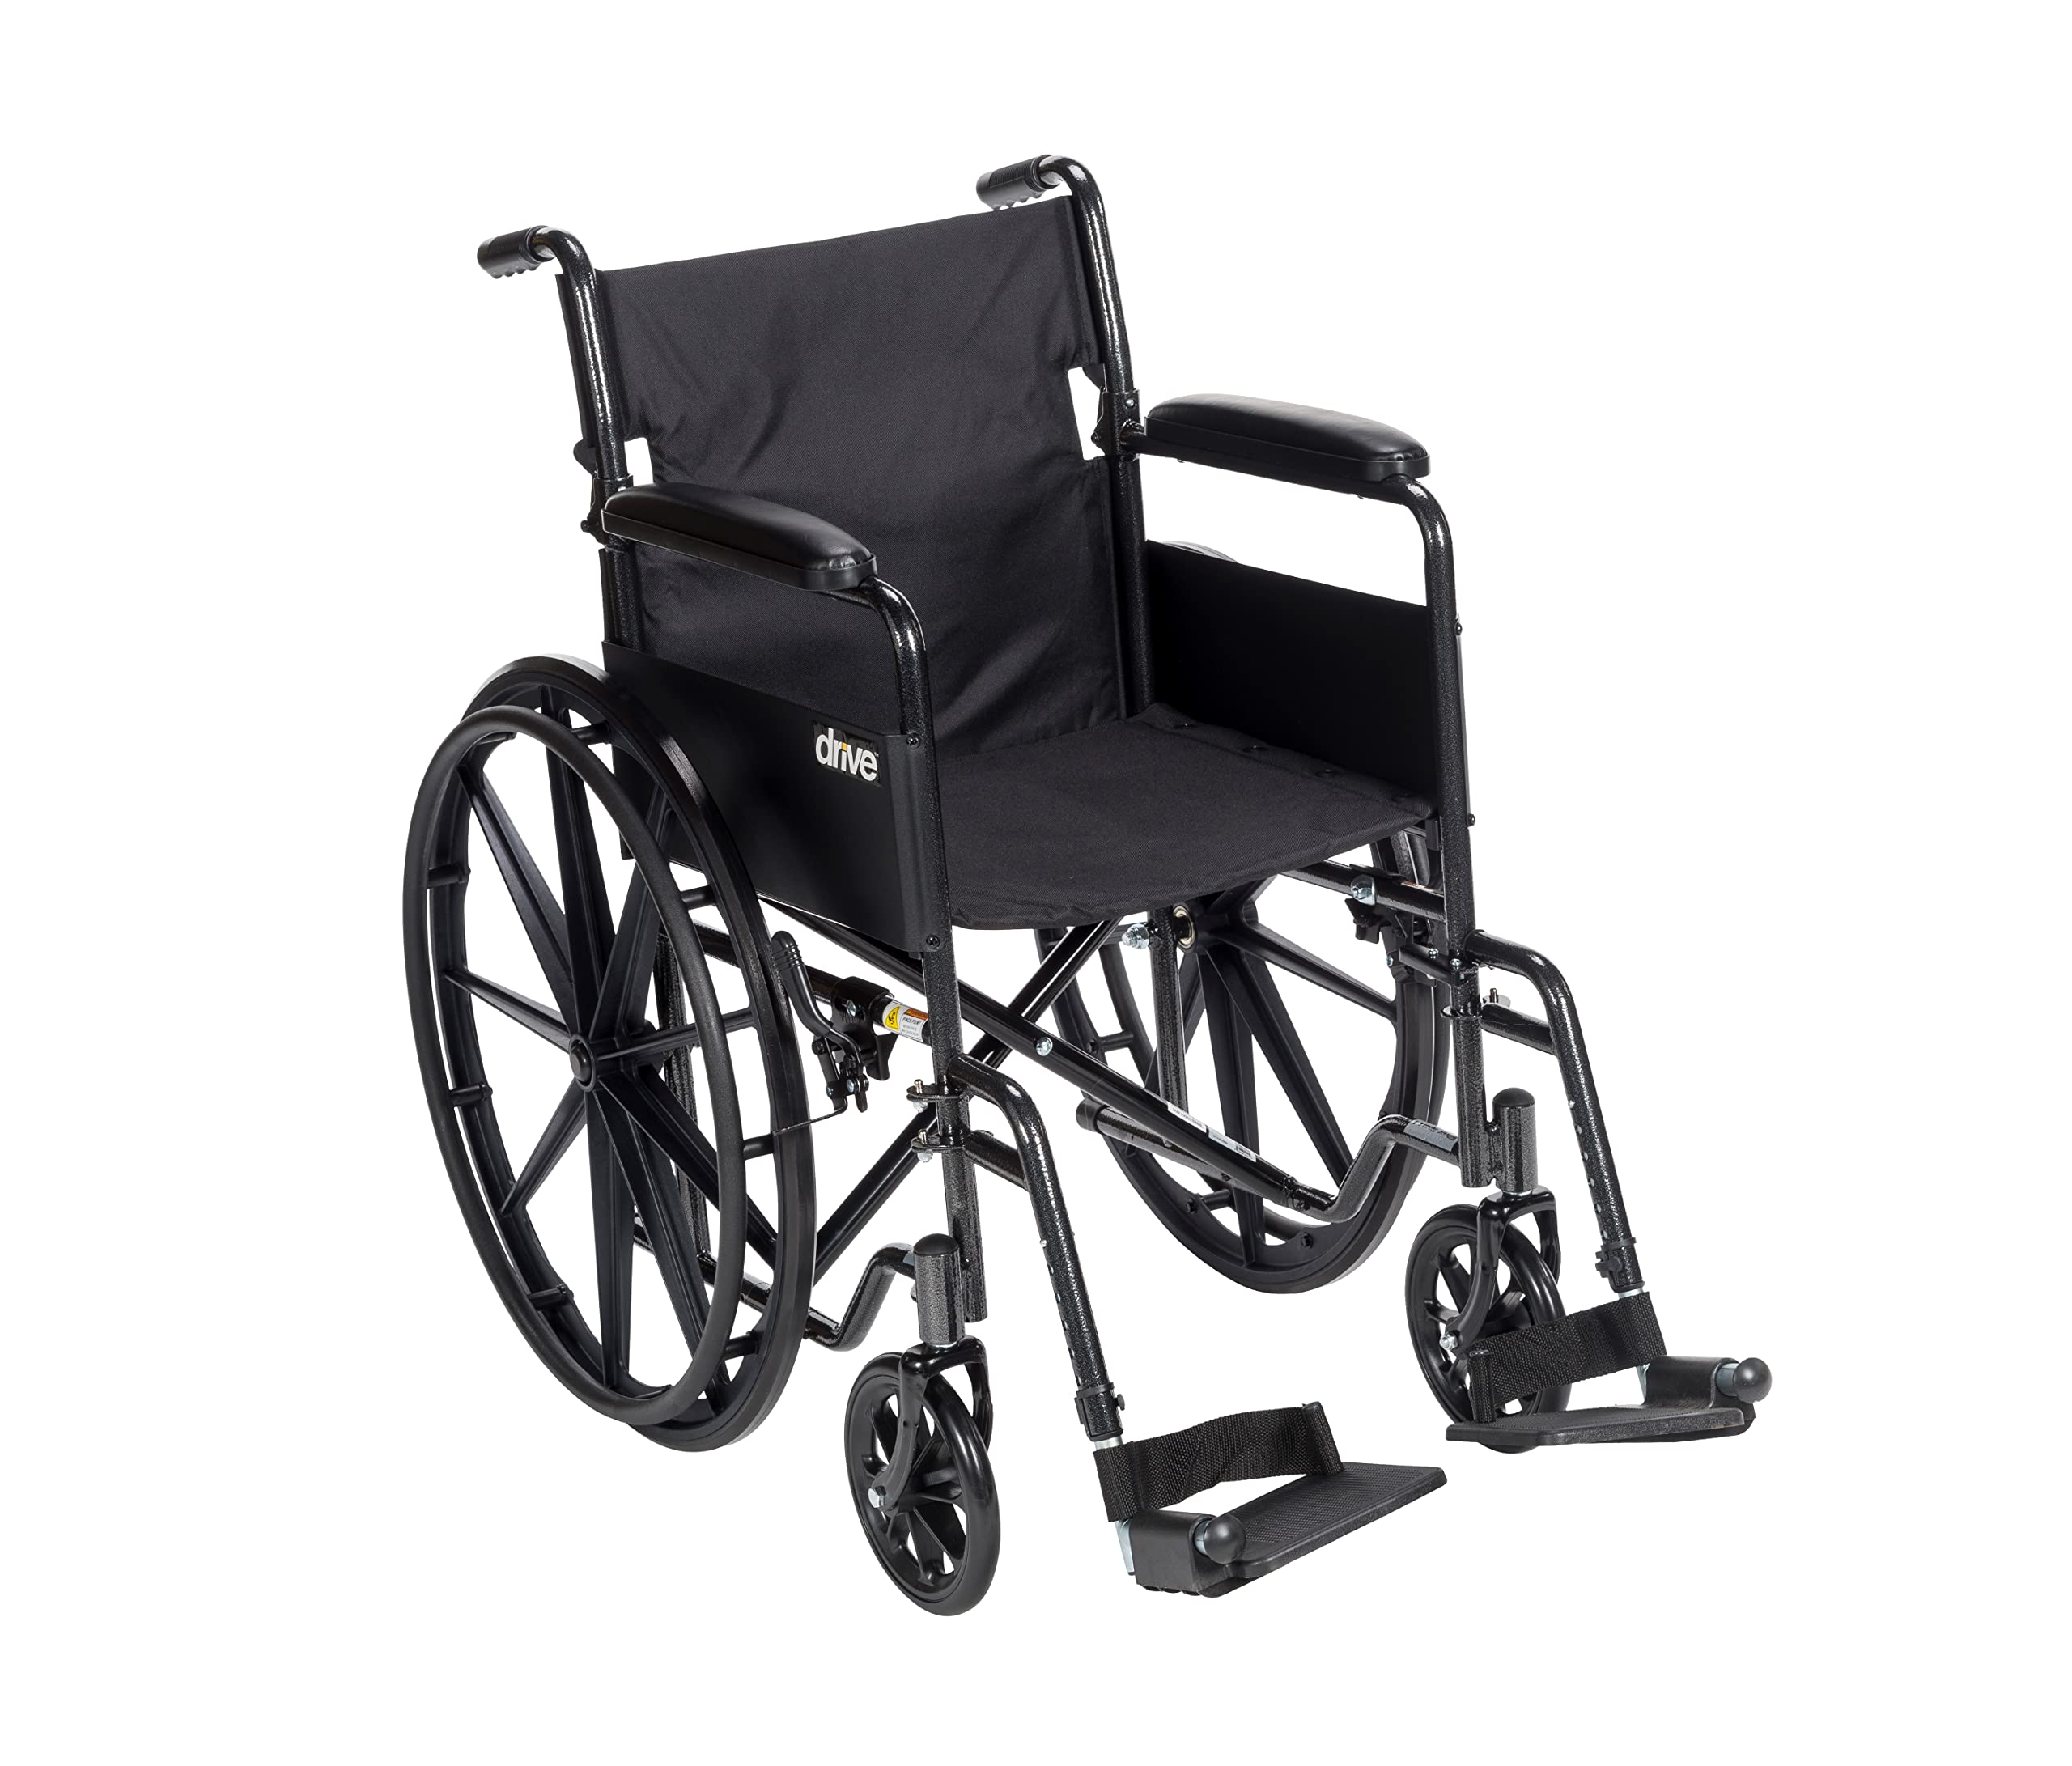 Drive Medical SSP118FA-SF Silver Sport 1 Folding Transport Wheelchair with Full Arms and Removable Swing-Away Footrest, Black